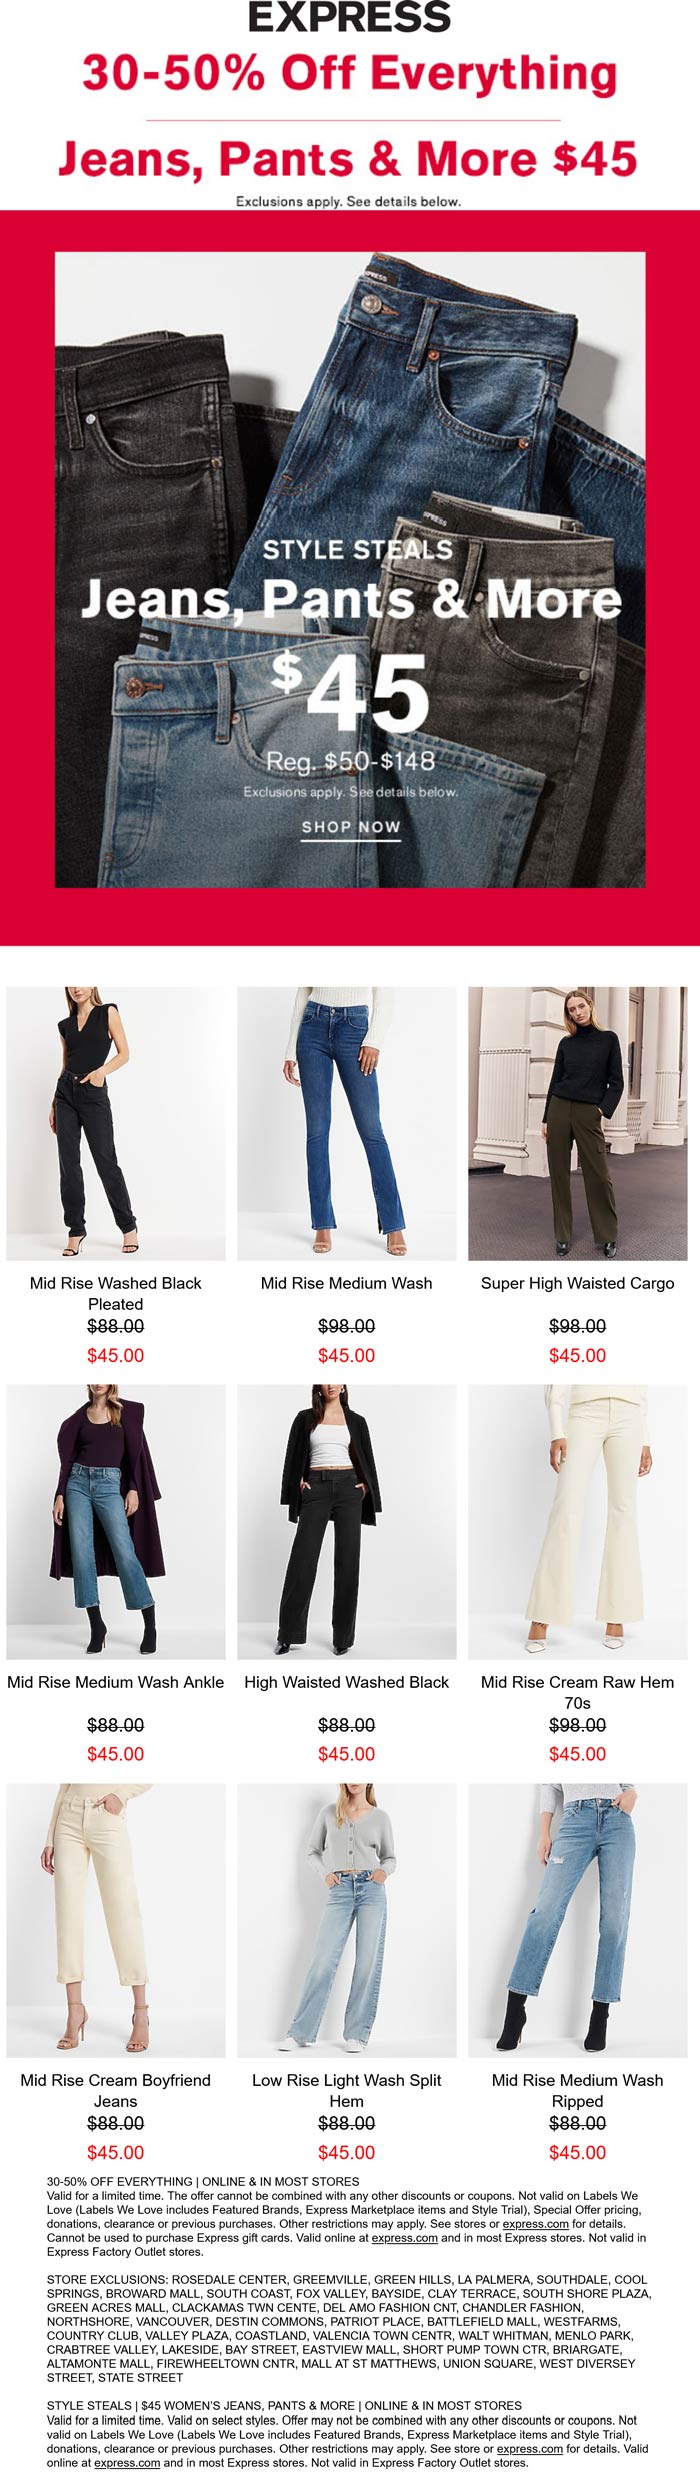 Express stores Coupon  30-50% off everything at Express, ditto online #express 